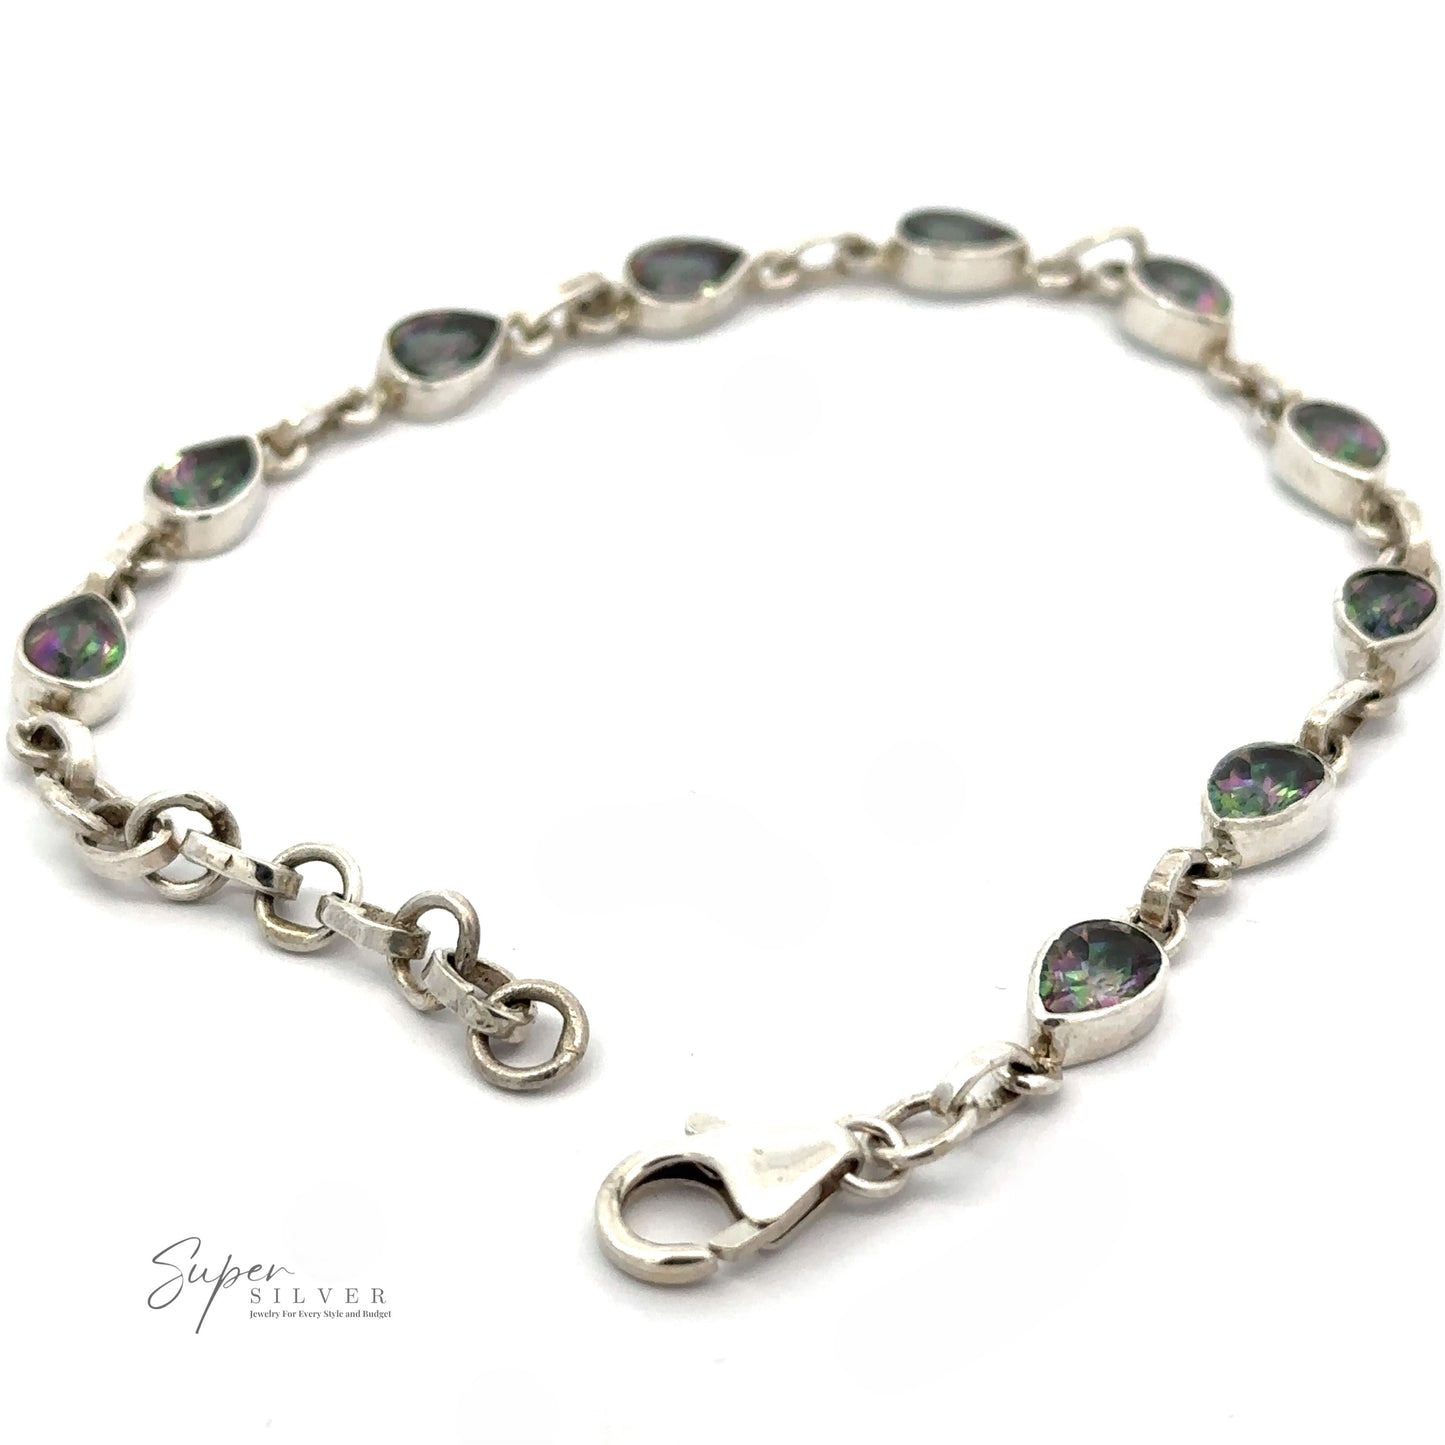 
                  
                    A silver bracelet adorned with teardrop-shaped gemstones and a lobster clasp lies on a white background. A "Super Silver" logo is visible at the bottom left corner, showcasing this exquisite Rainbow Mystic Topaz Teardrop Shape Link Bracelet.
                  
                